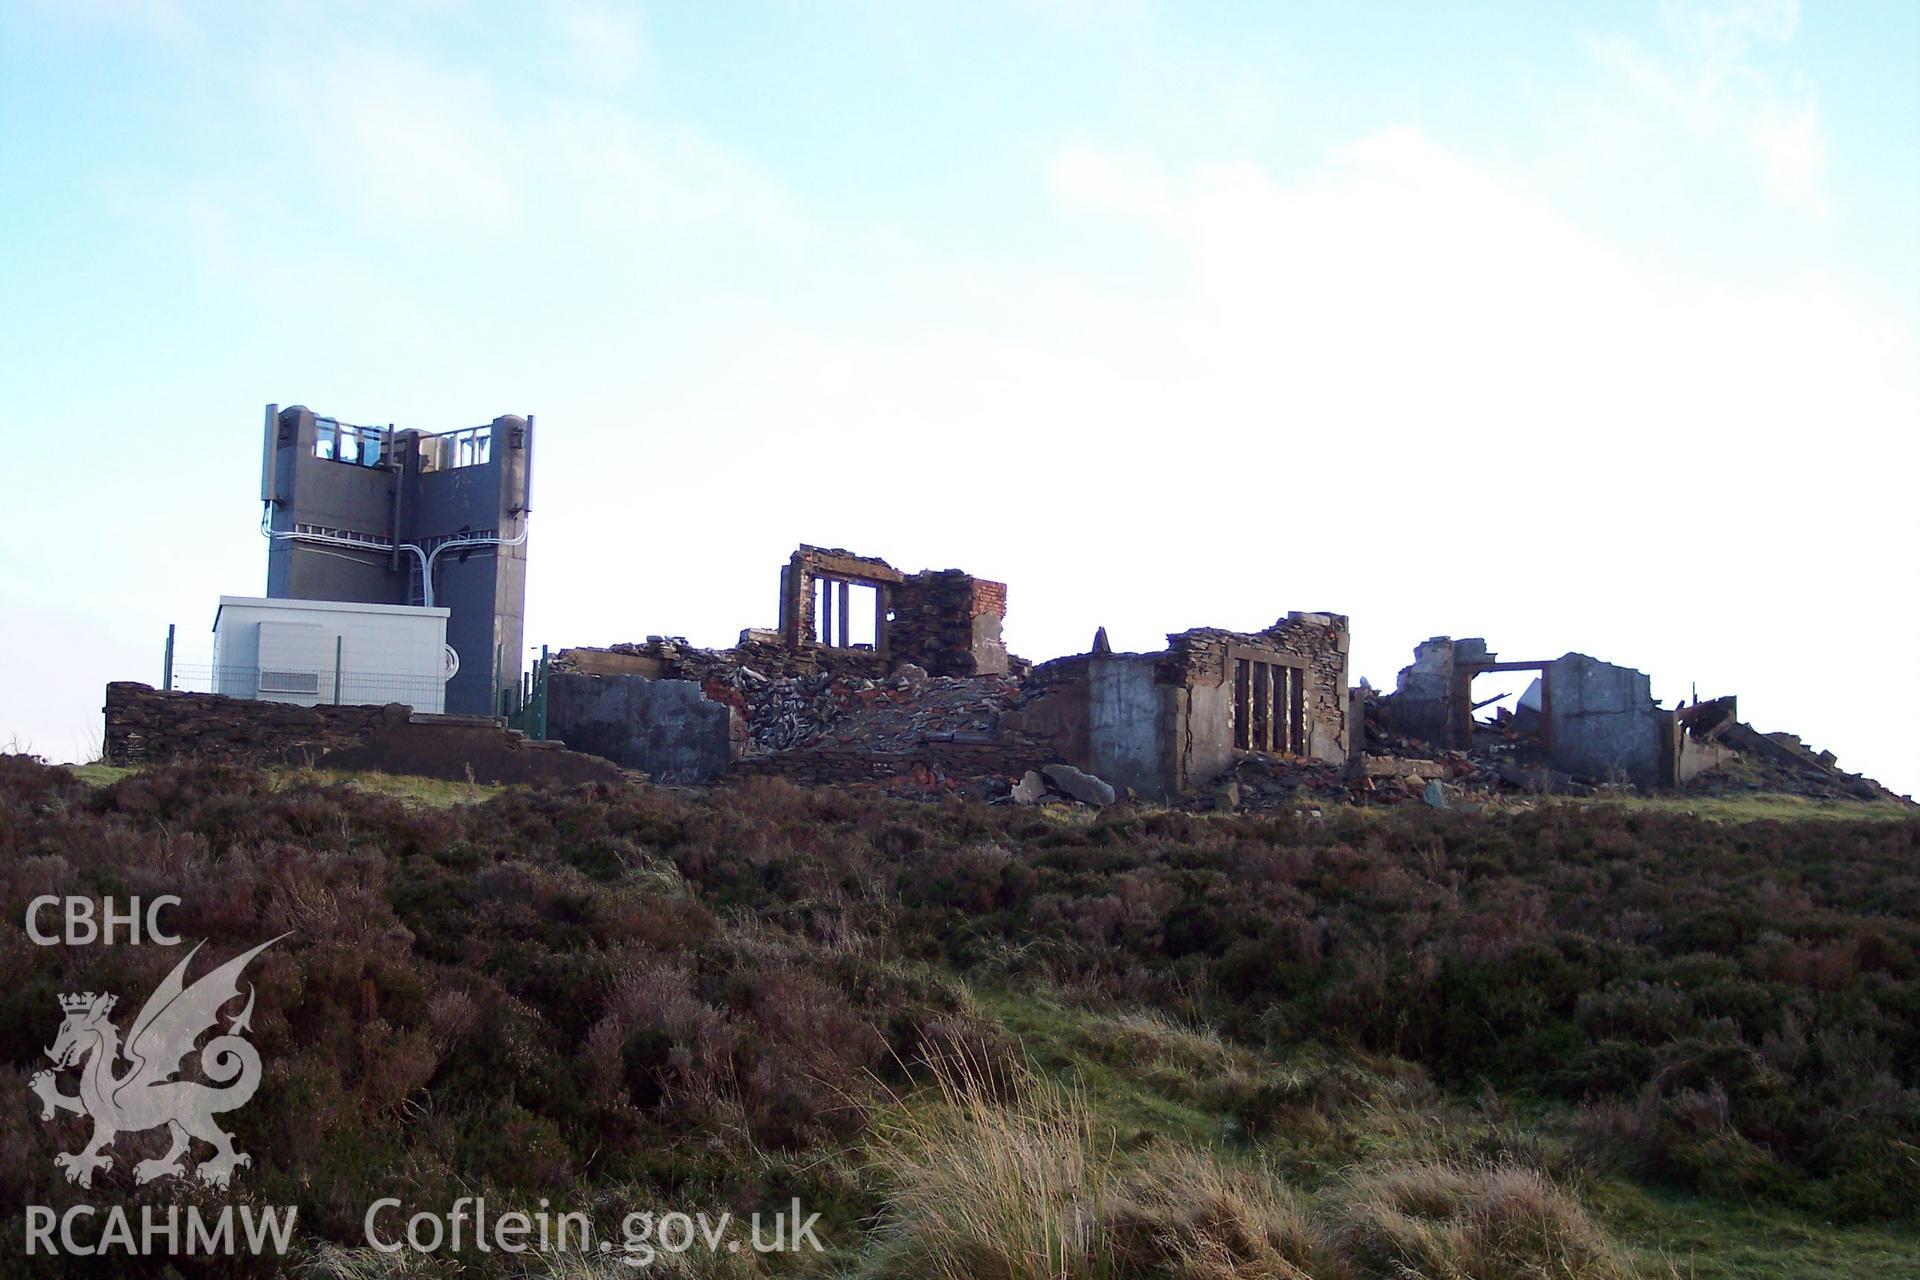 Photograph of Gwylfa Hiraethog Shooting Box taken from the east on 07/12/2004 by P. Kok during an Upland Survey undertaken by Oxford Archaeology North.